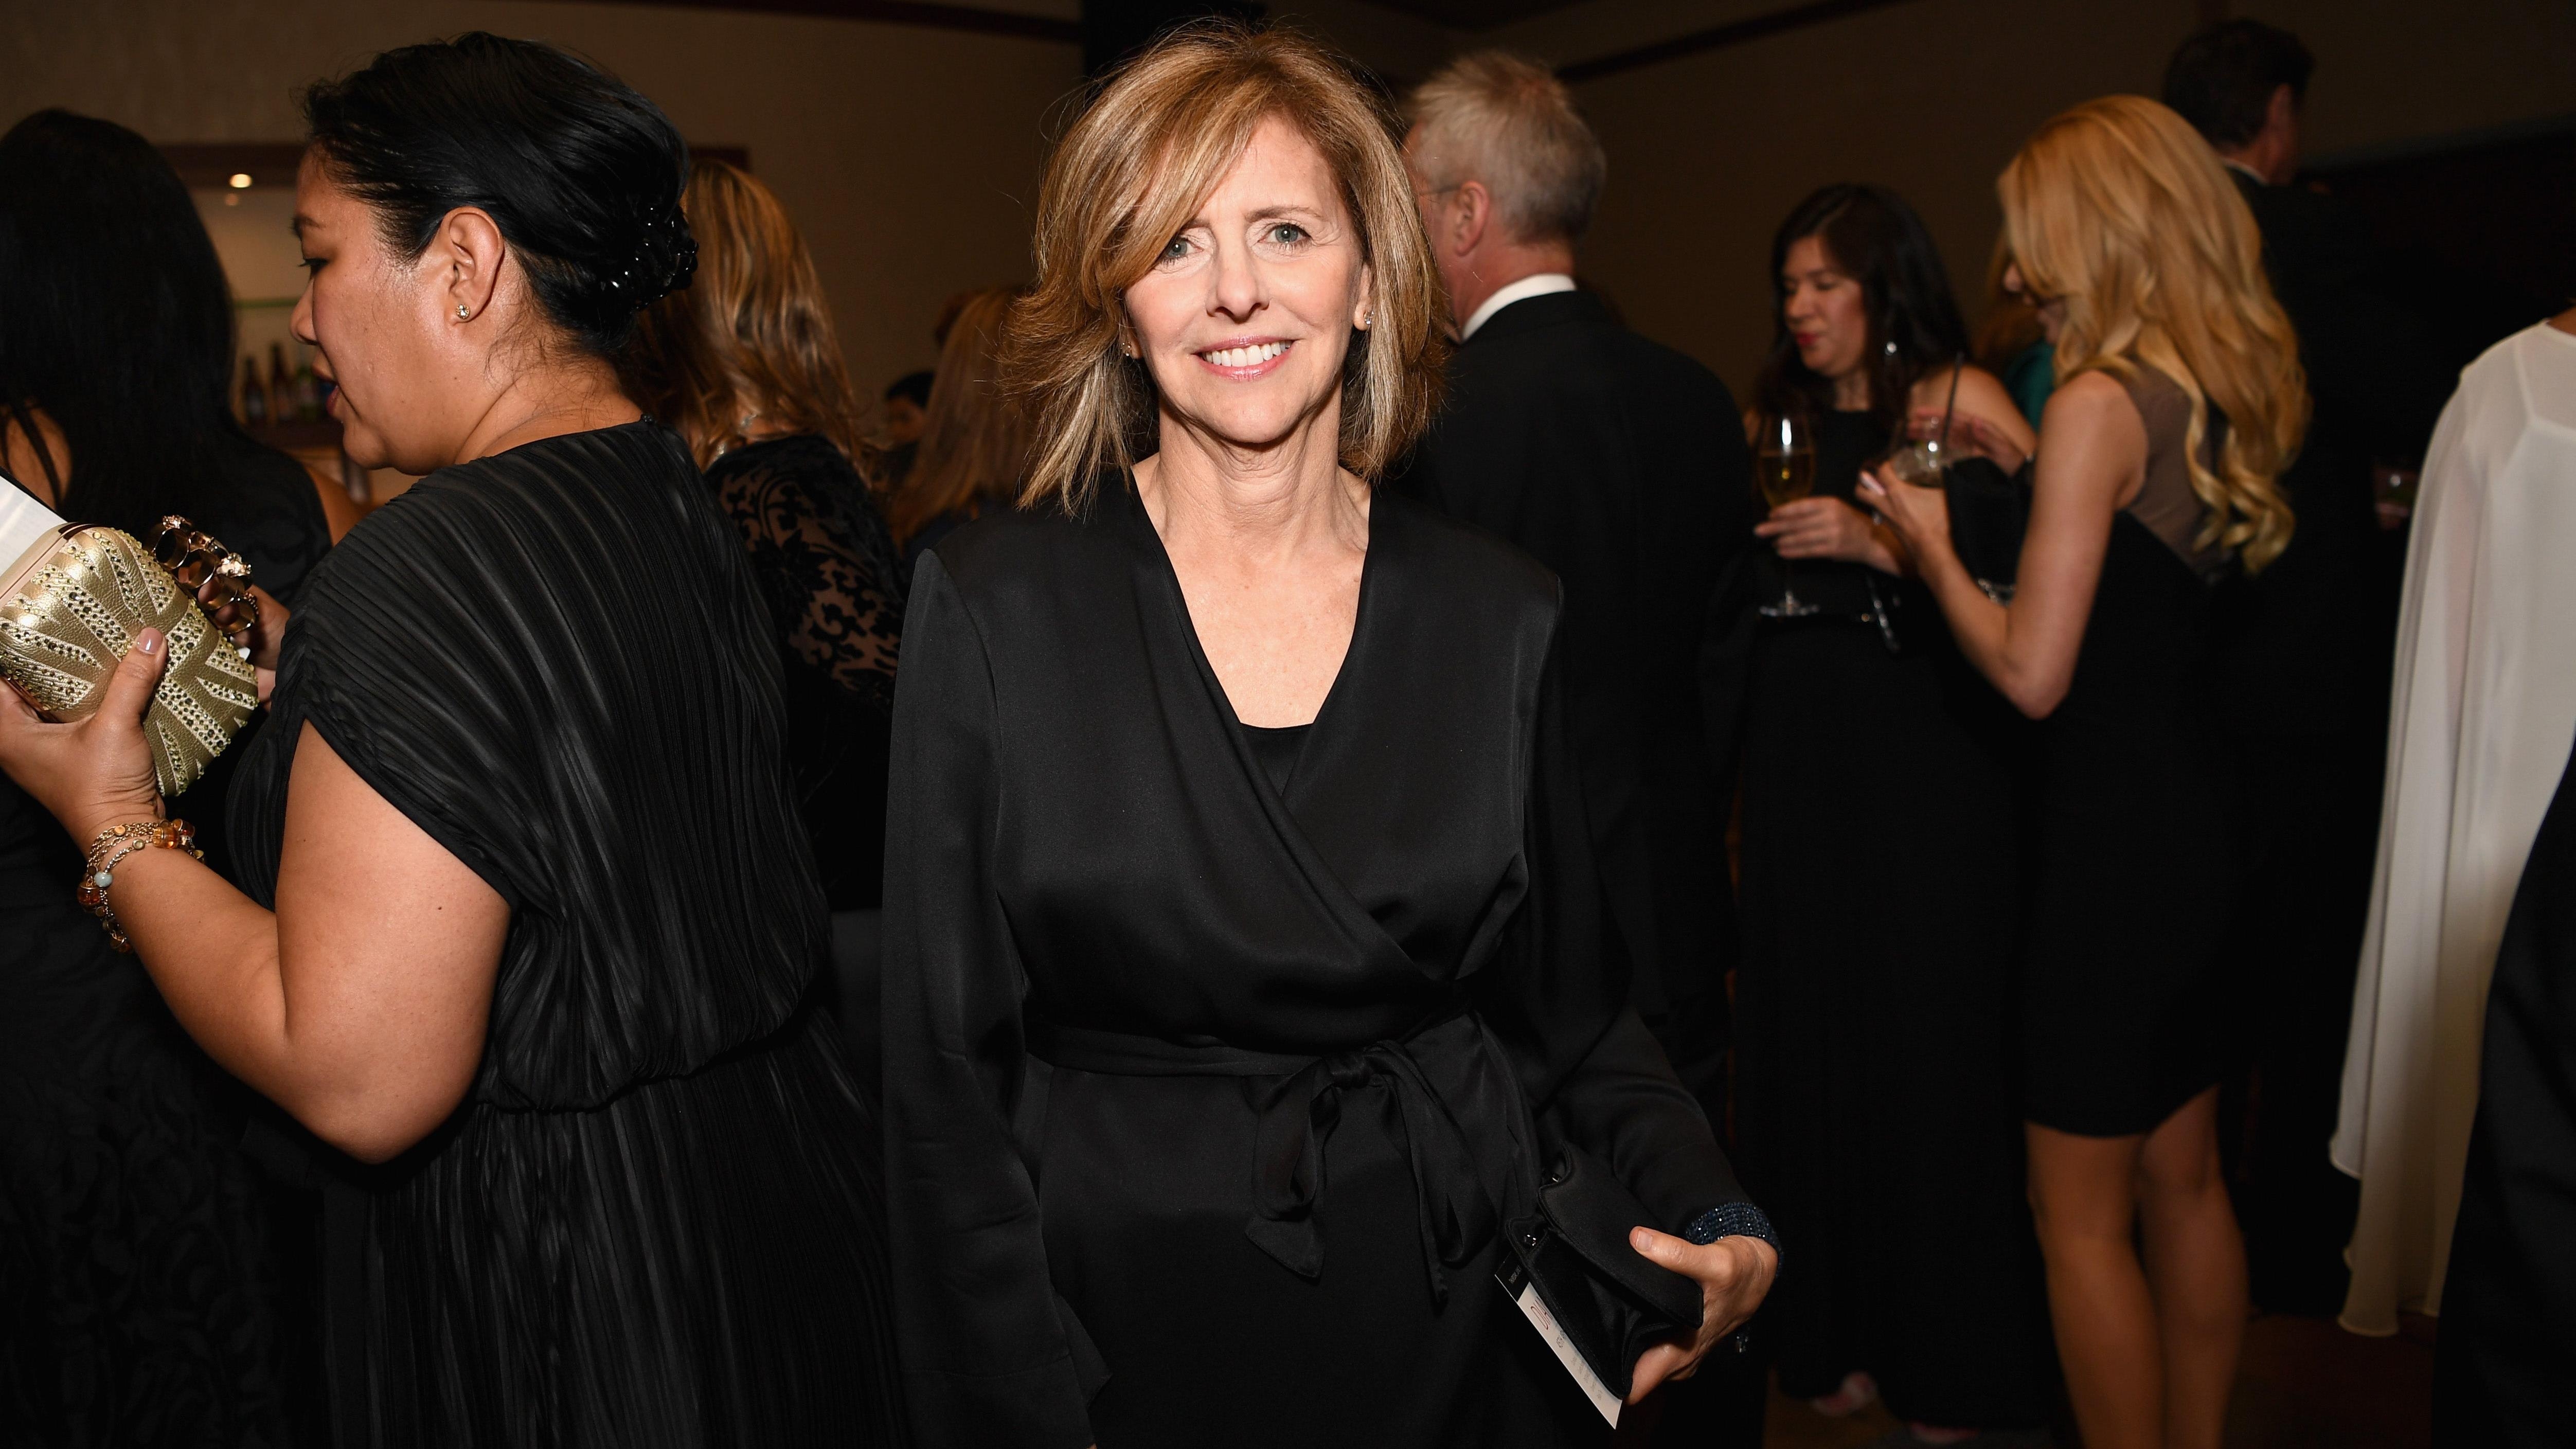 Heck yeah, Nancy Meyers is writing and directing a new movie